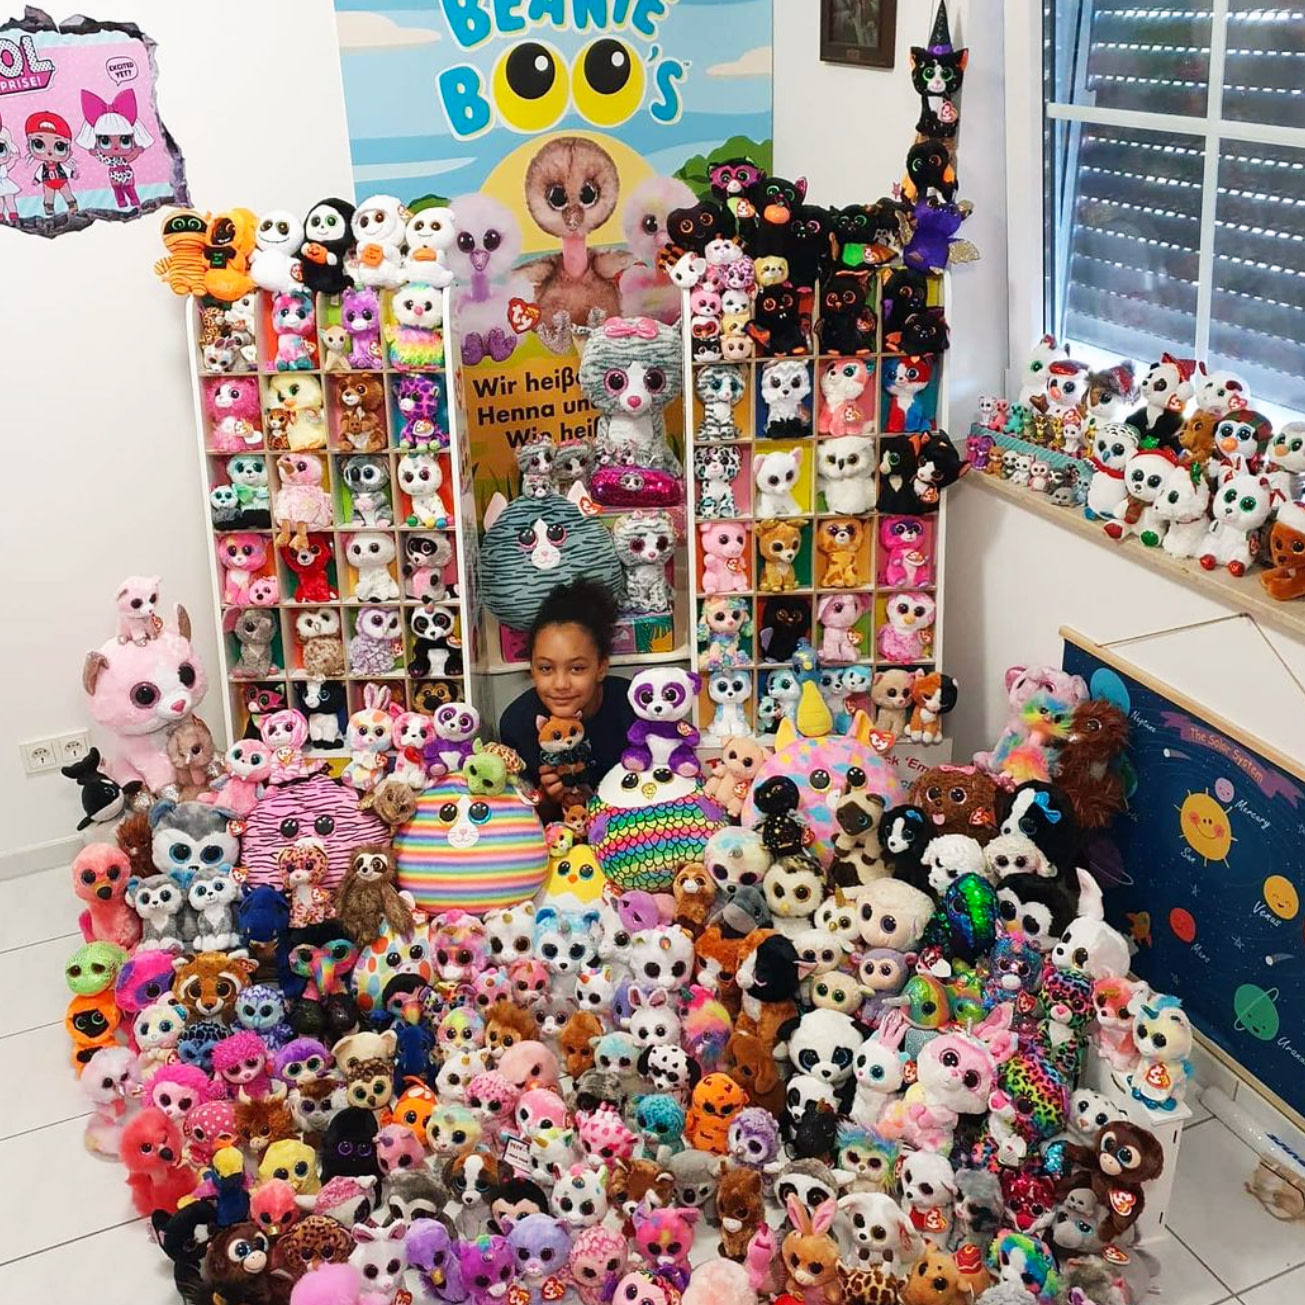 Ty on X: This is definitely one of the coolest Ty collections we've ever  seen. How many Beanie Boos do you have? 📸: @ lorrainehorton1 on IG  #tybeanieboos #beanieboos #beanieboocollector #beanieboosforlife  #ilovebeanieboos #